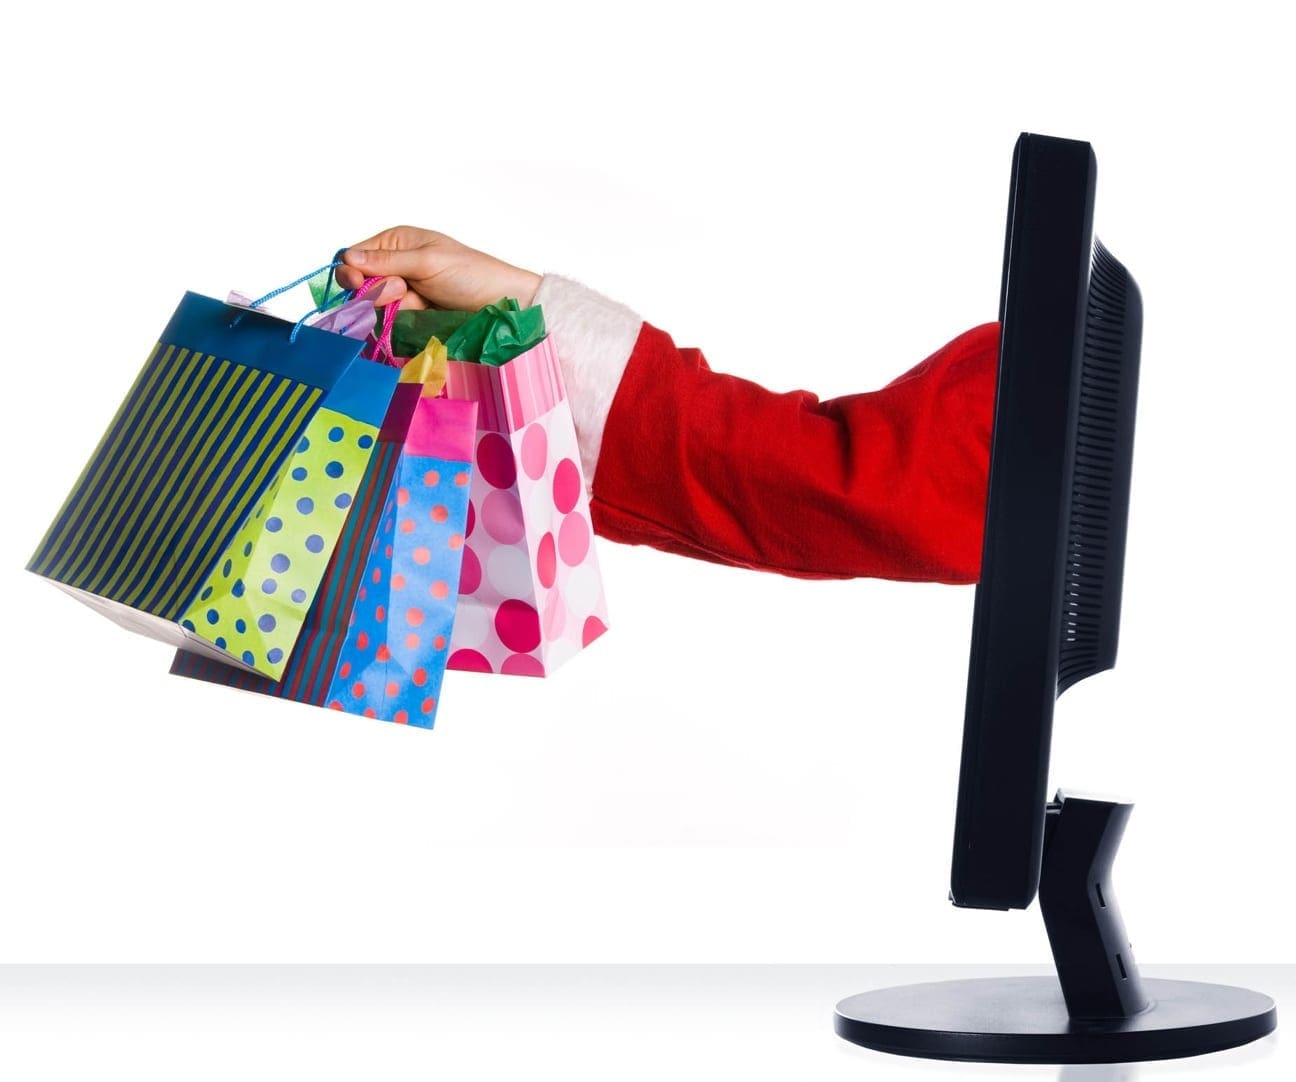 Holiday Shopping Online